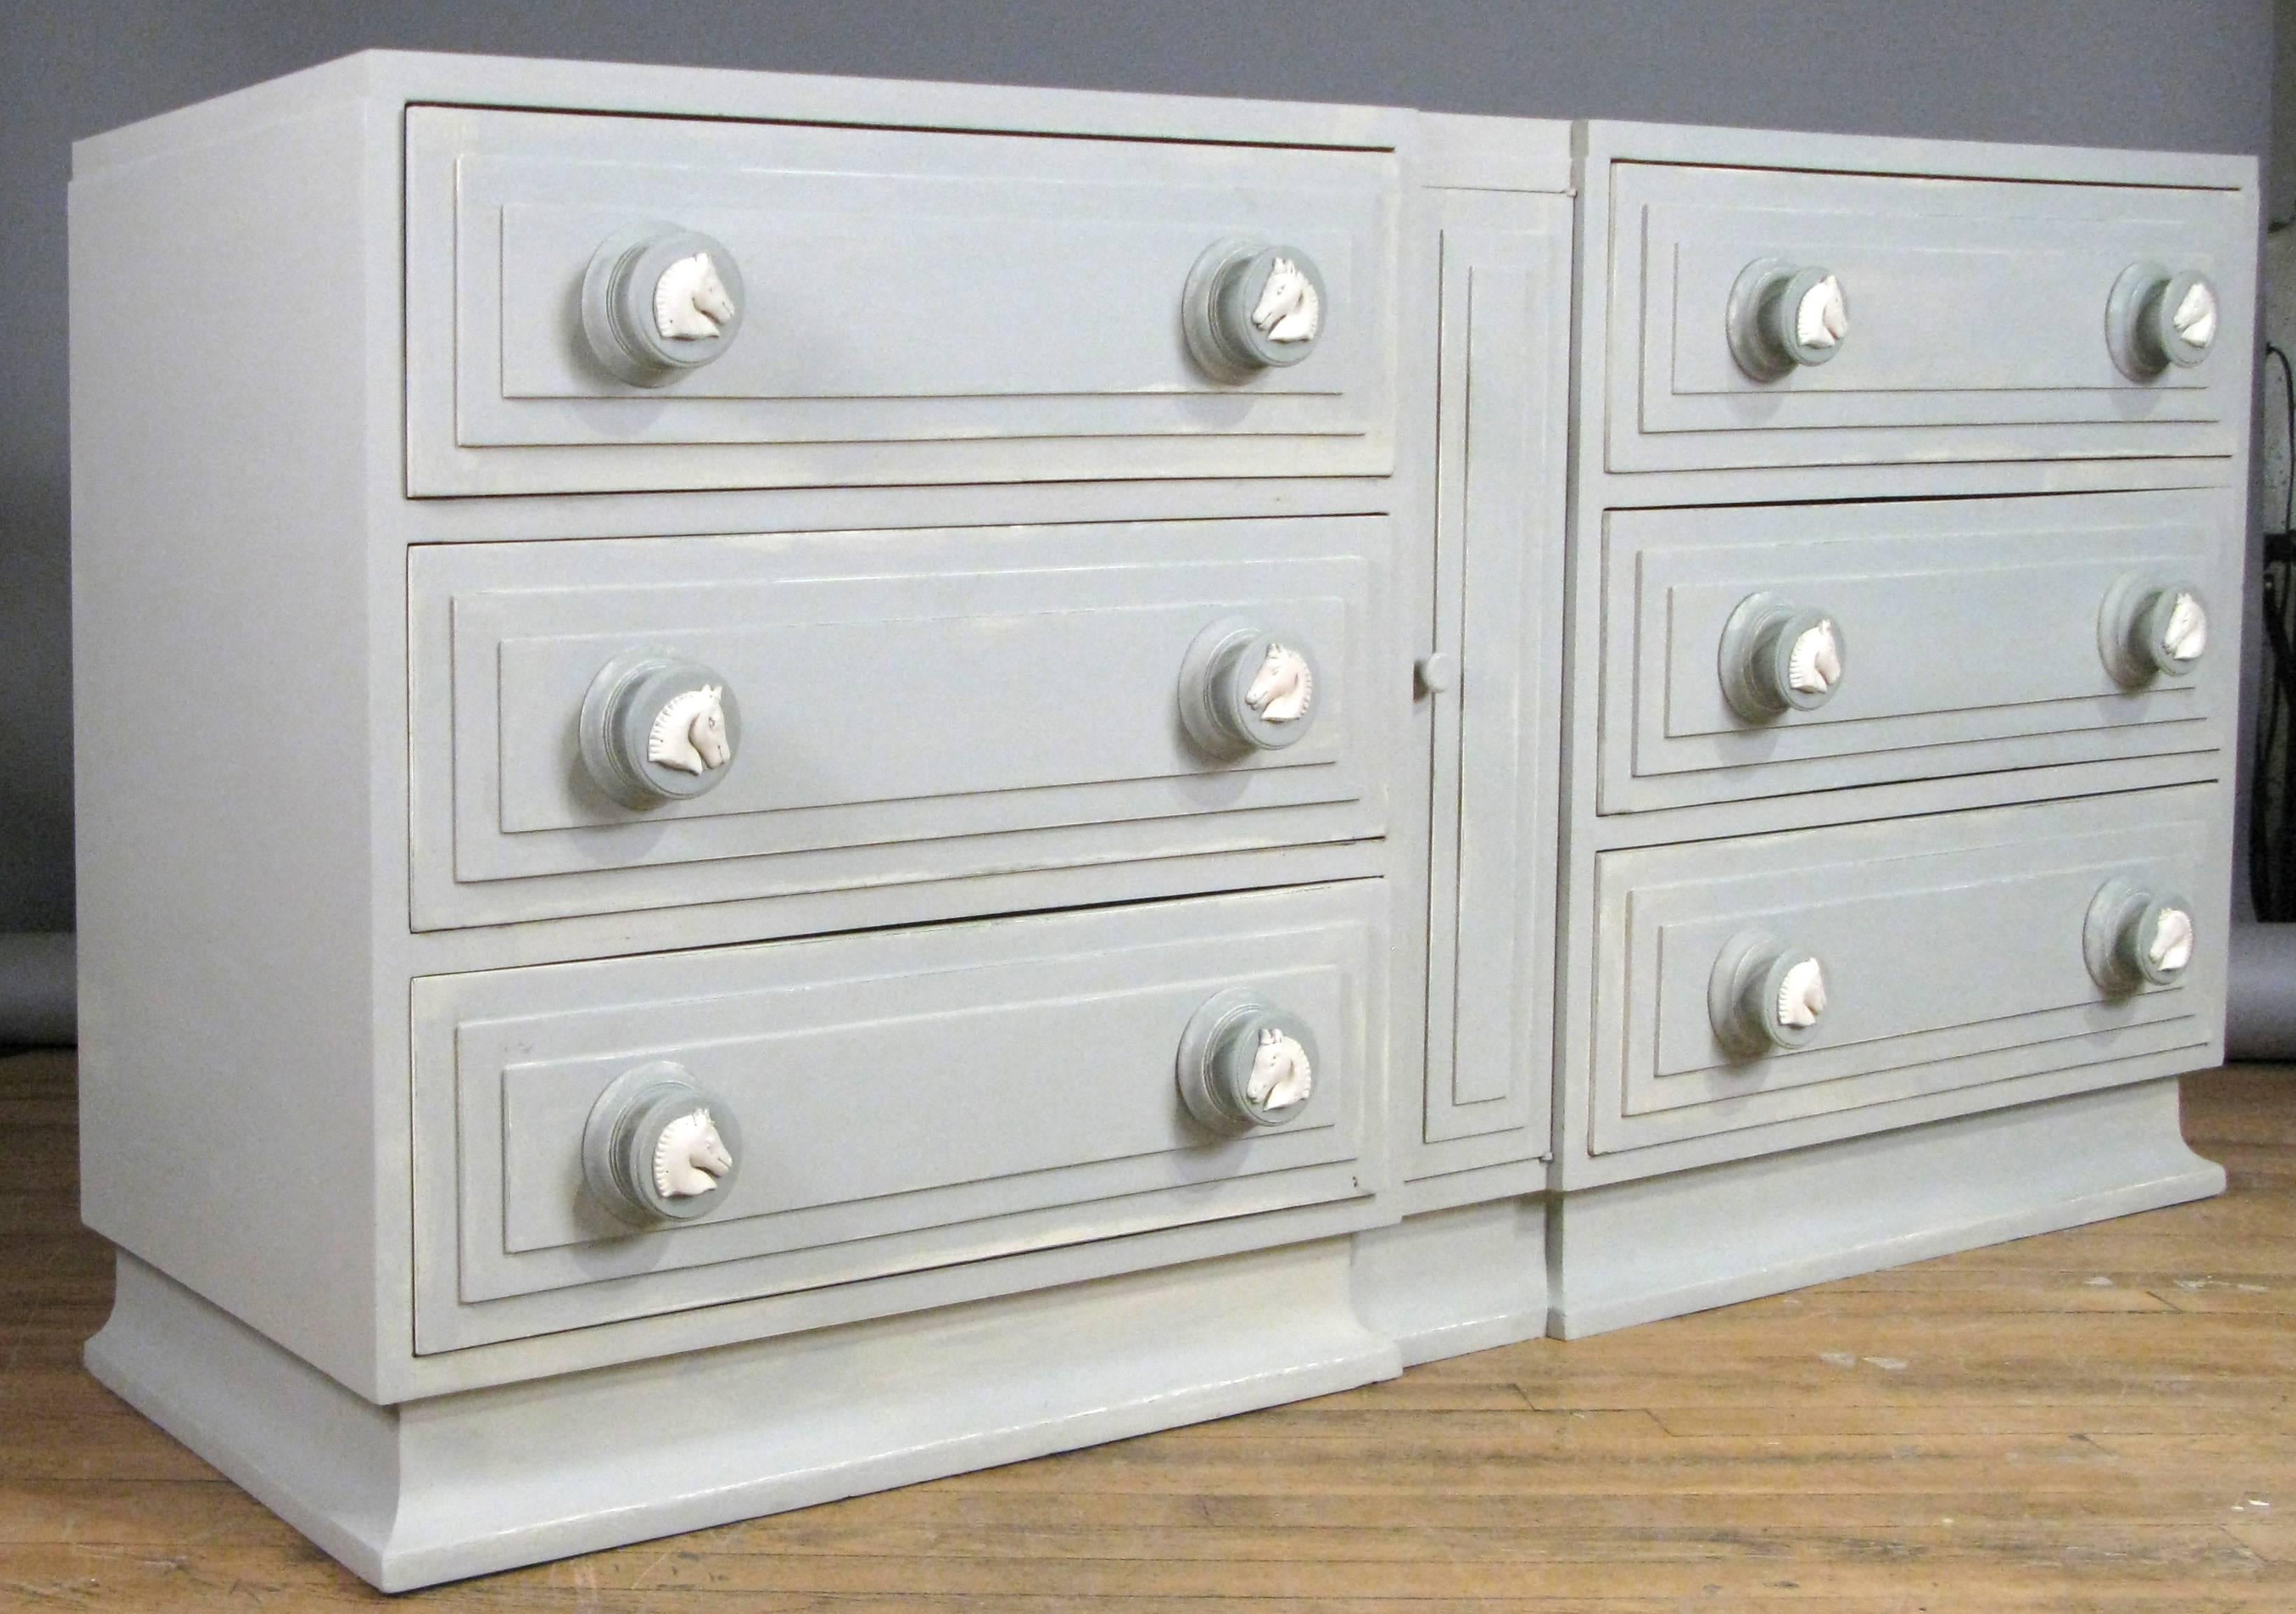 A very handsome 1950s six-drawer chest by Maslow Freen with carved wood horse head details on the drawer pulls and an ogee base. This chest has been hand-painted in a pale grey with medium grey accents. There is a tall vertical door in the centre as